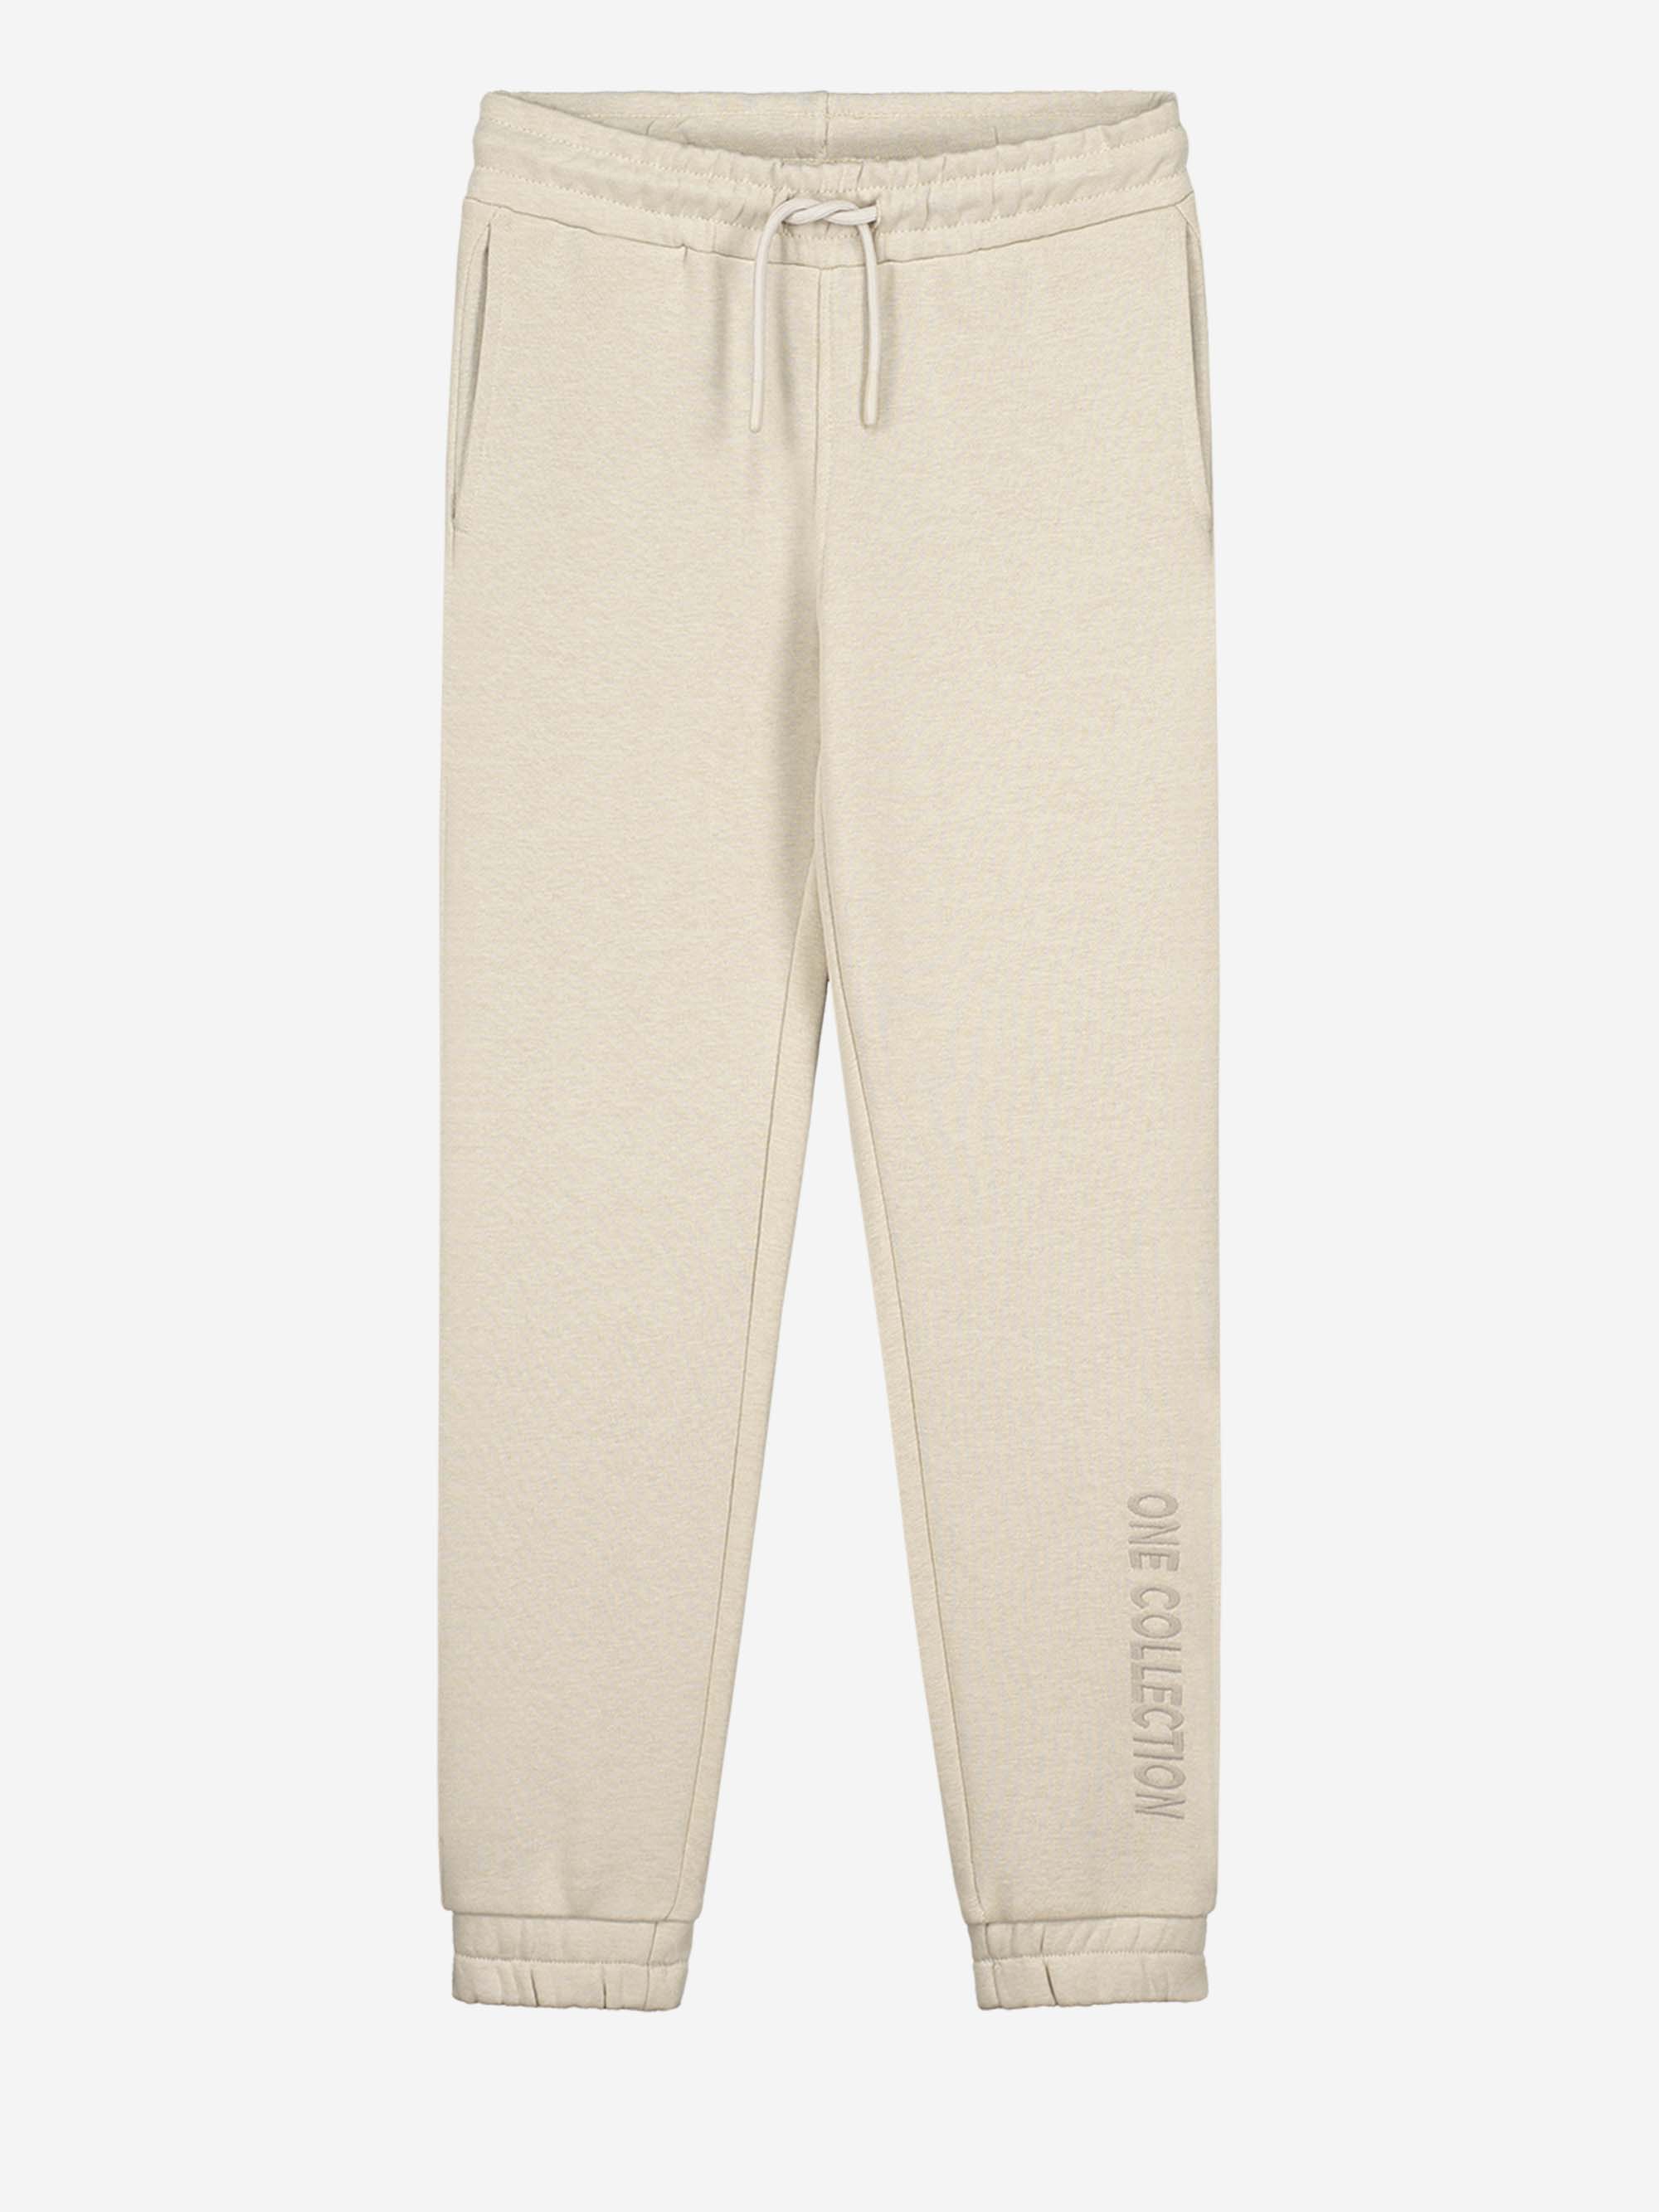 One collection forward sweatpants